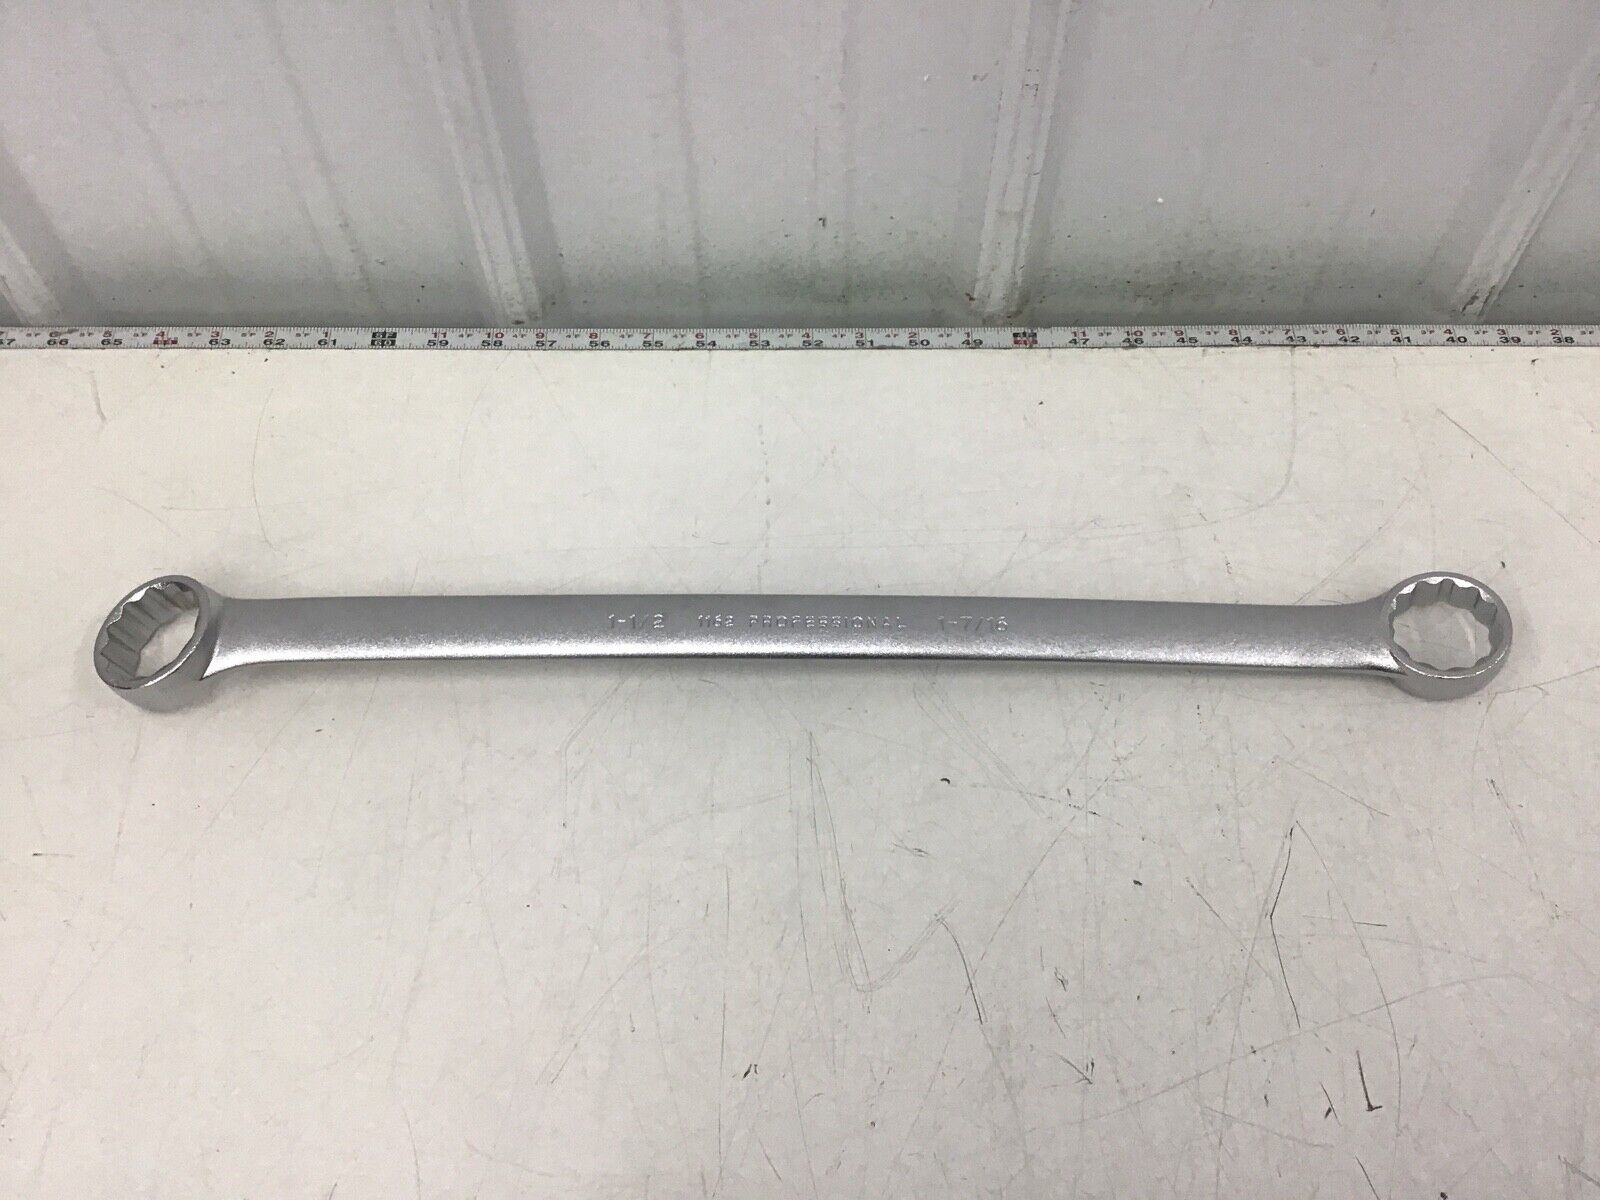 PROTO - J1162 Box End Wrench Head Size 1 7/16 in 1 1/2 in Overall Length 22 1/4\